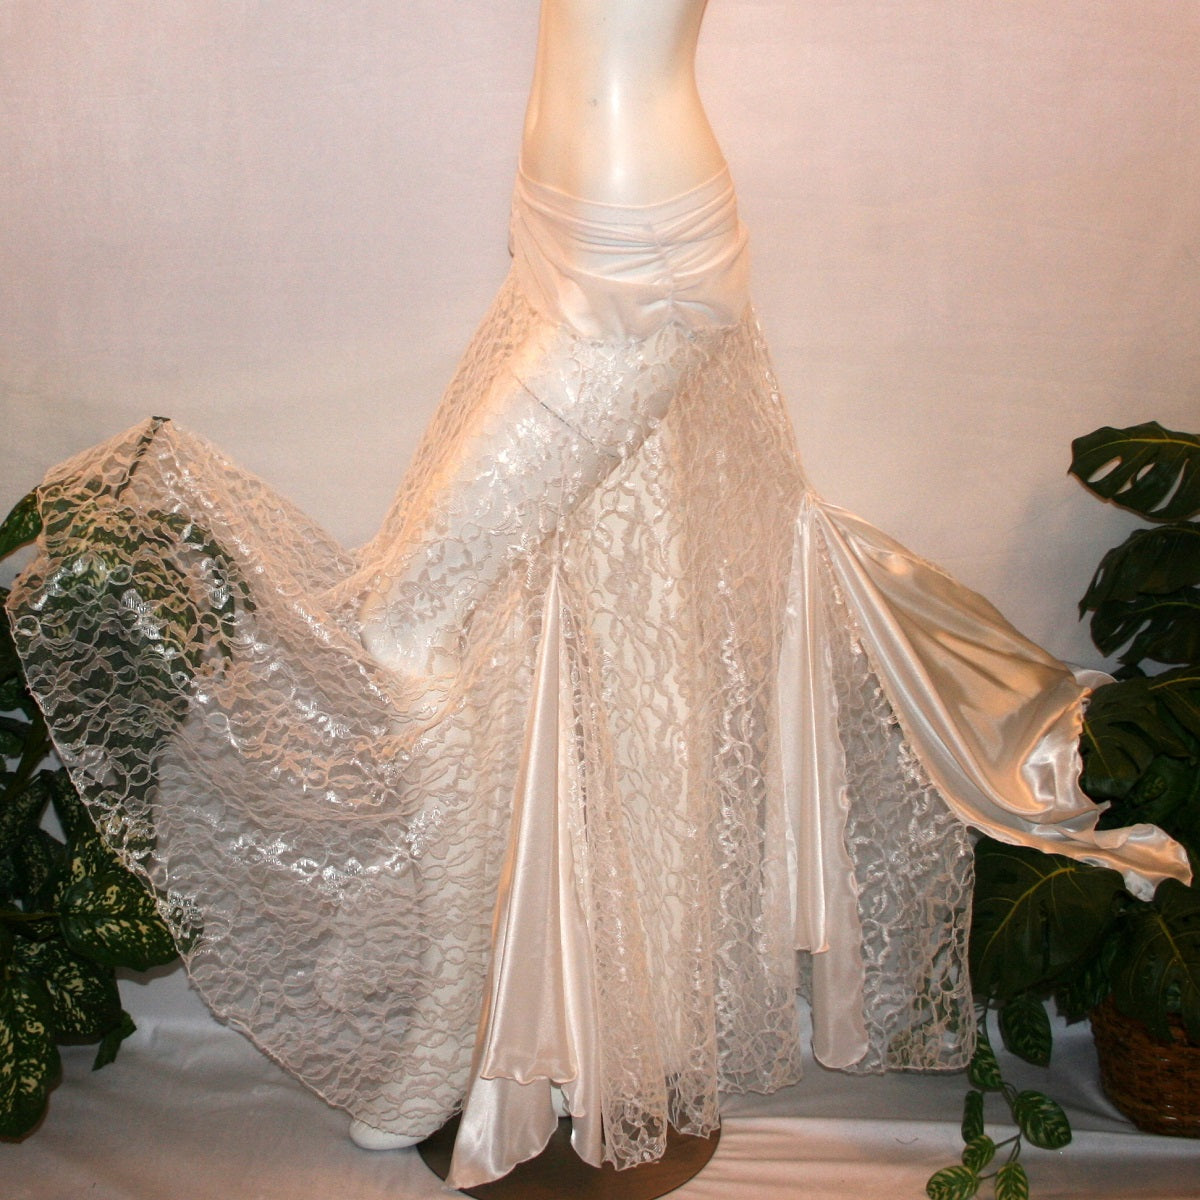 flaired side view of White ballroom skirt created of yards of white lace with a white sheer stretch mesh ruched hip band, has inset panels & floats of white stretch satin.